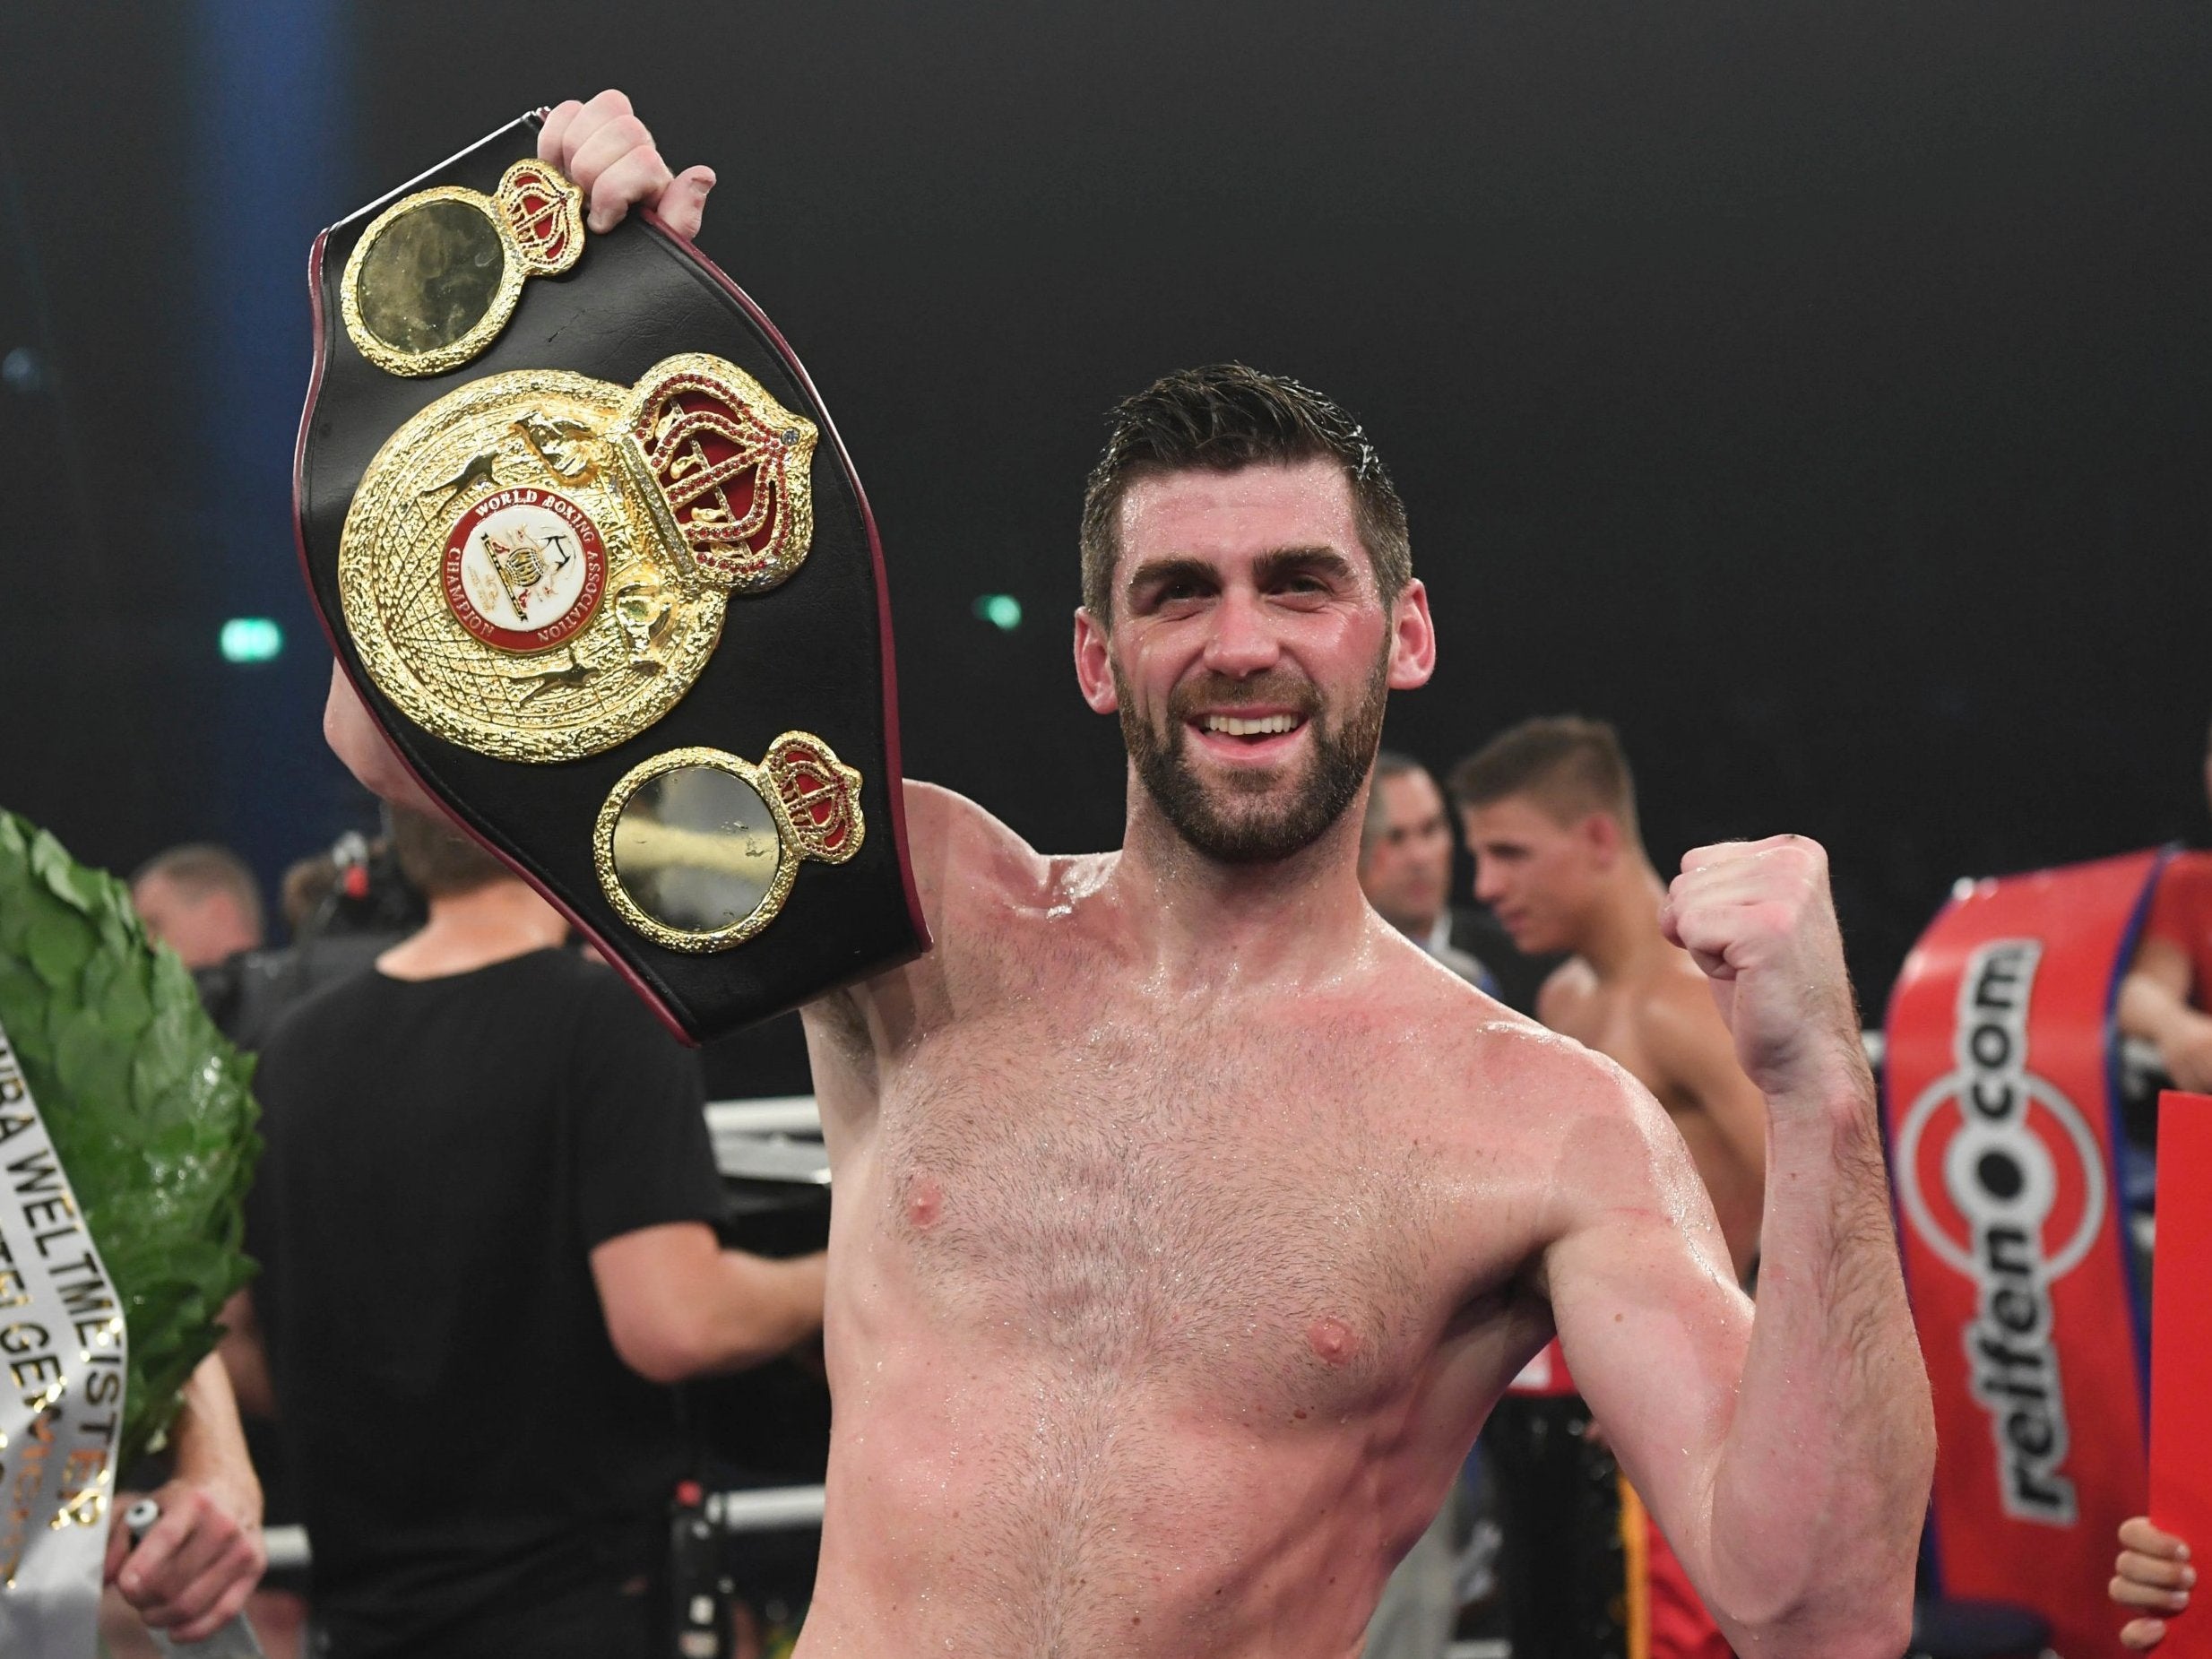 Fielding is finally a world champion after working his way all the way to the top